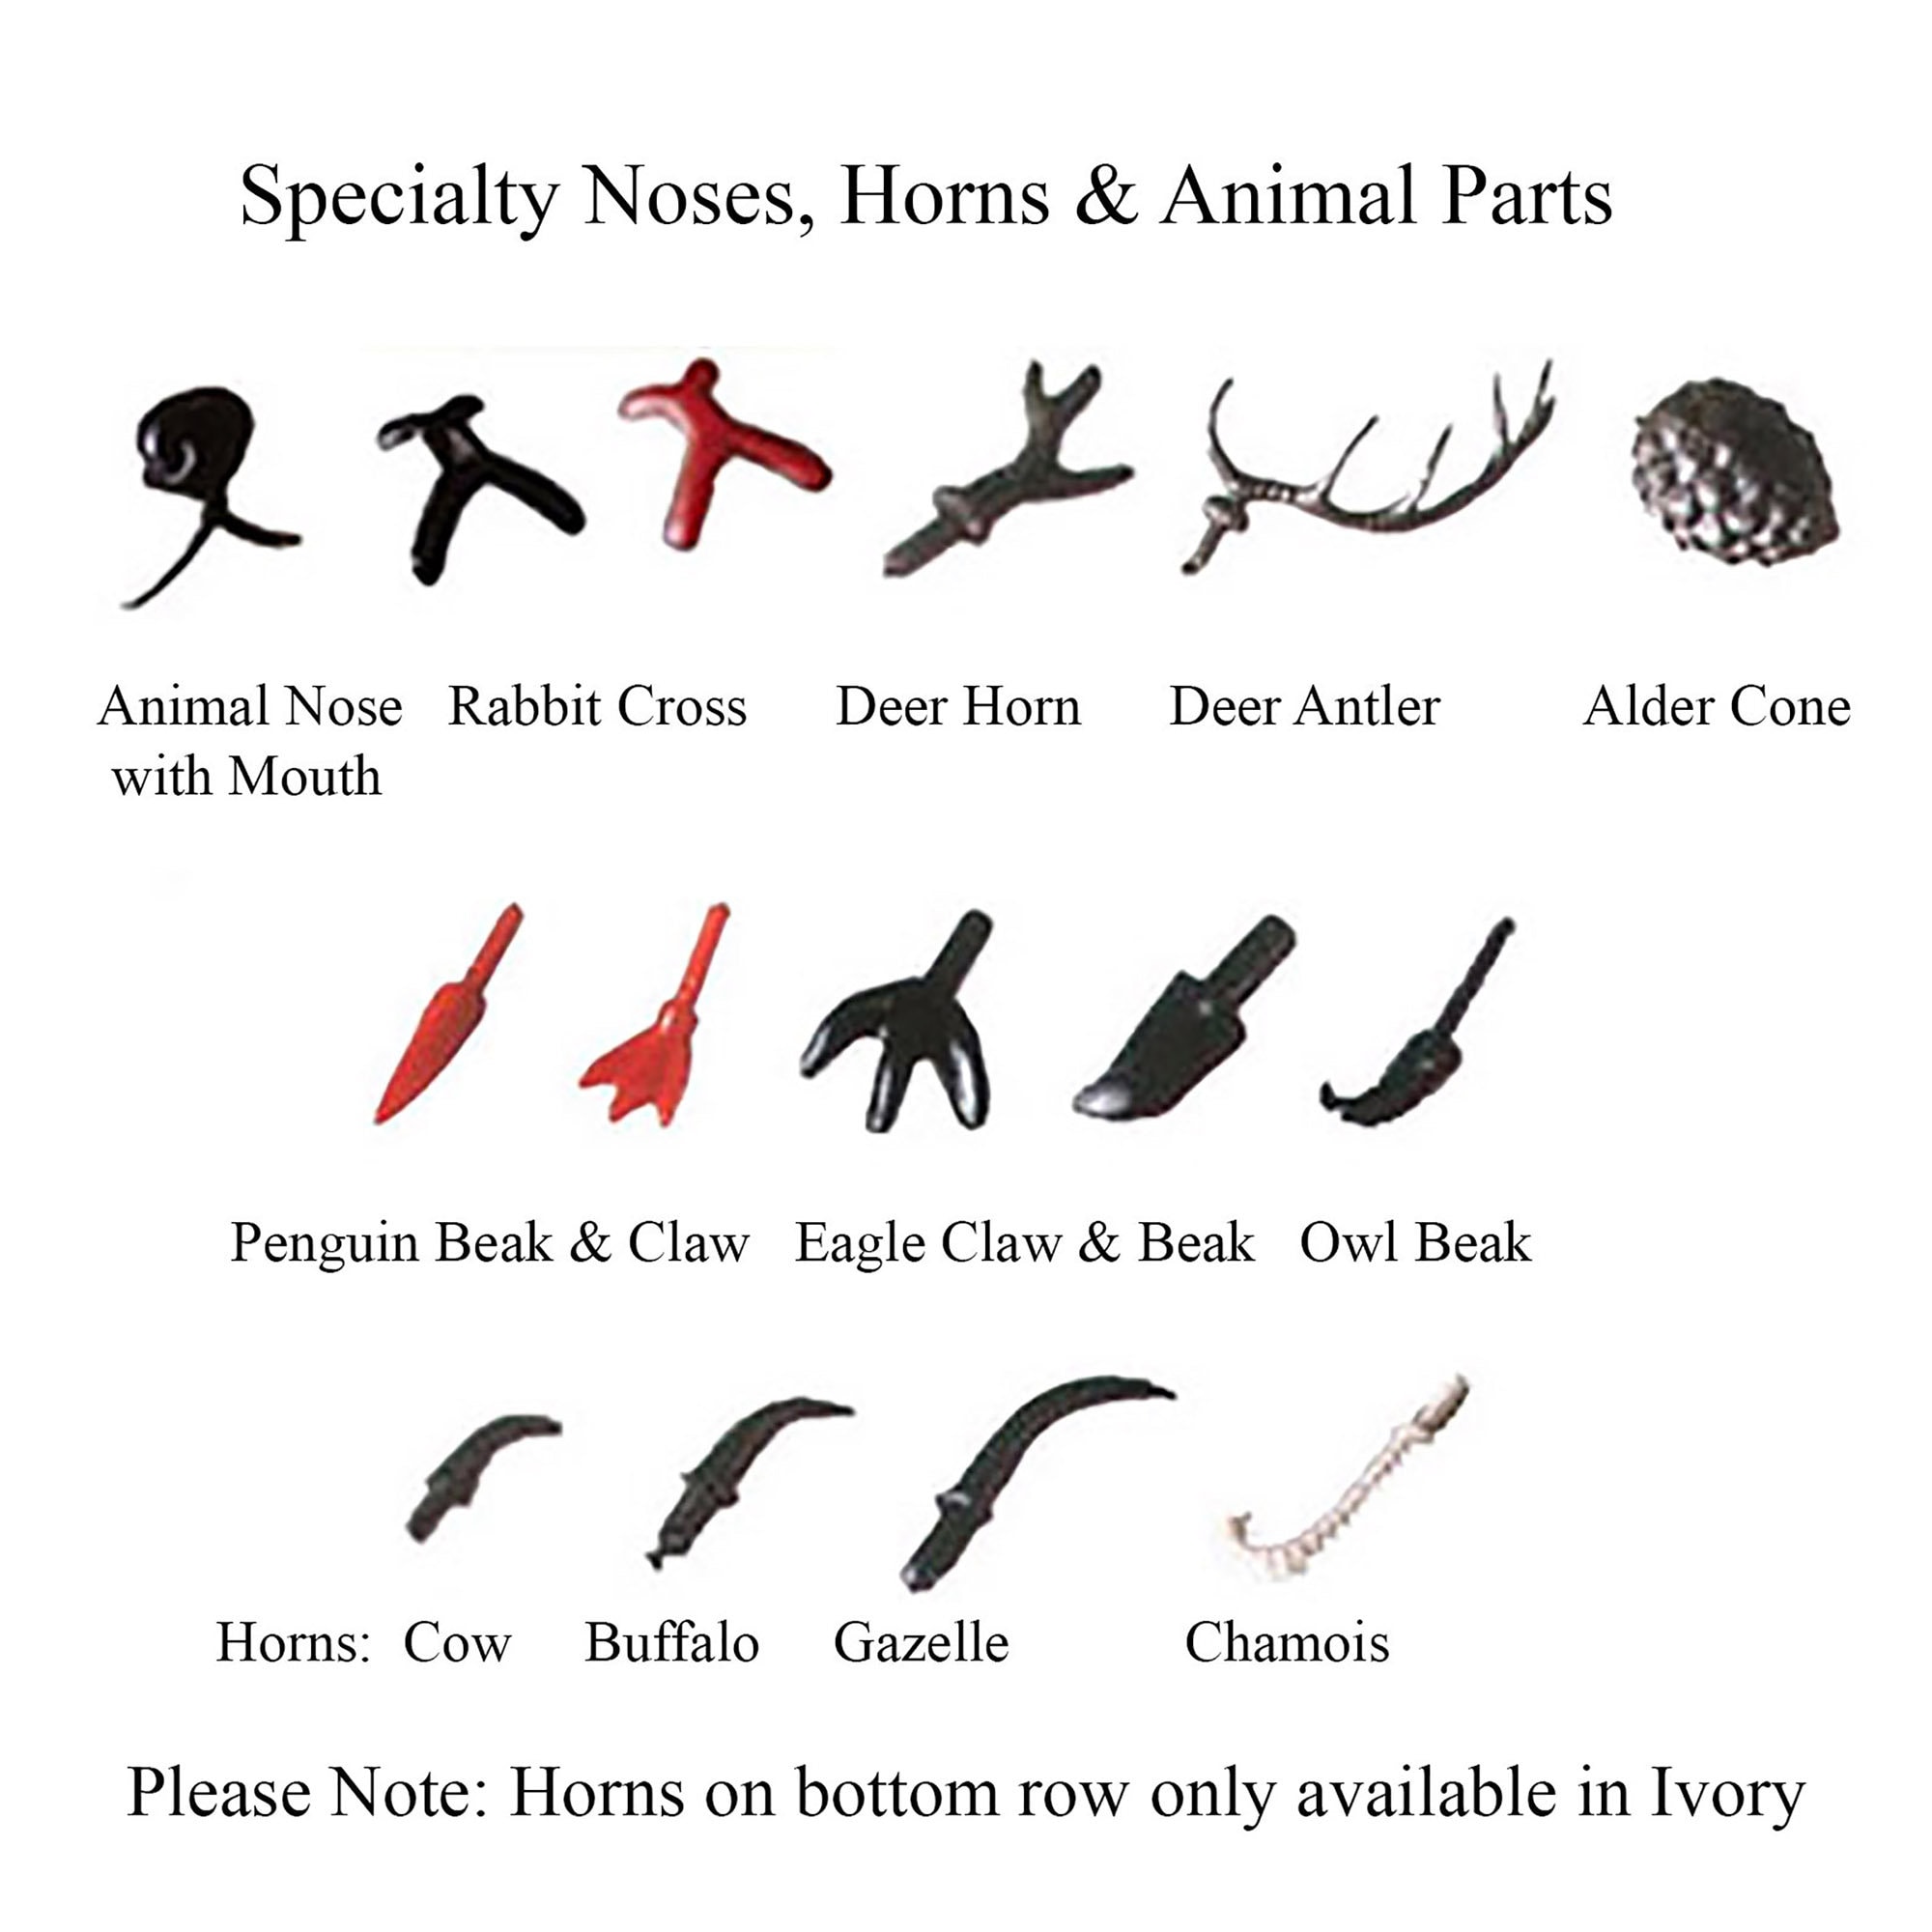 10 Pieces Specialty Noses Animal Horns Animal Parts Rabbit - Etsy Israel